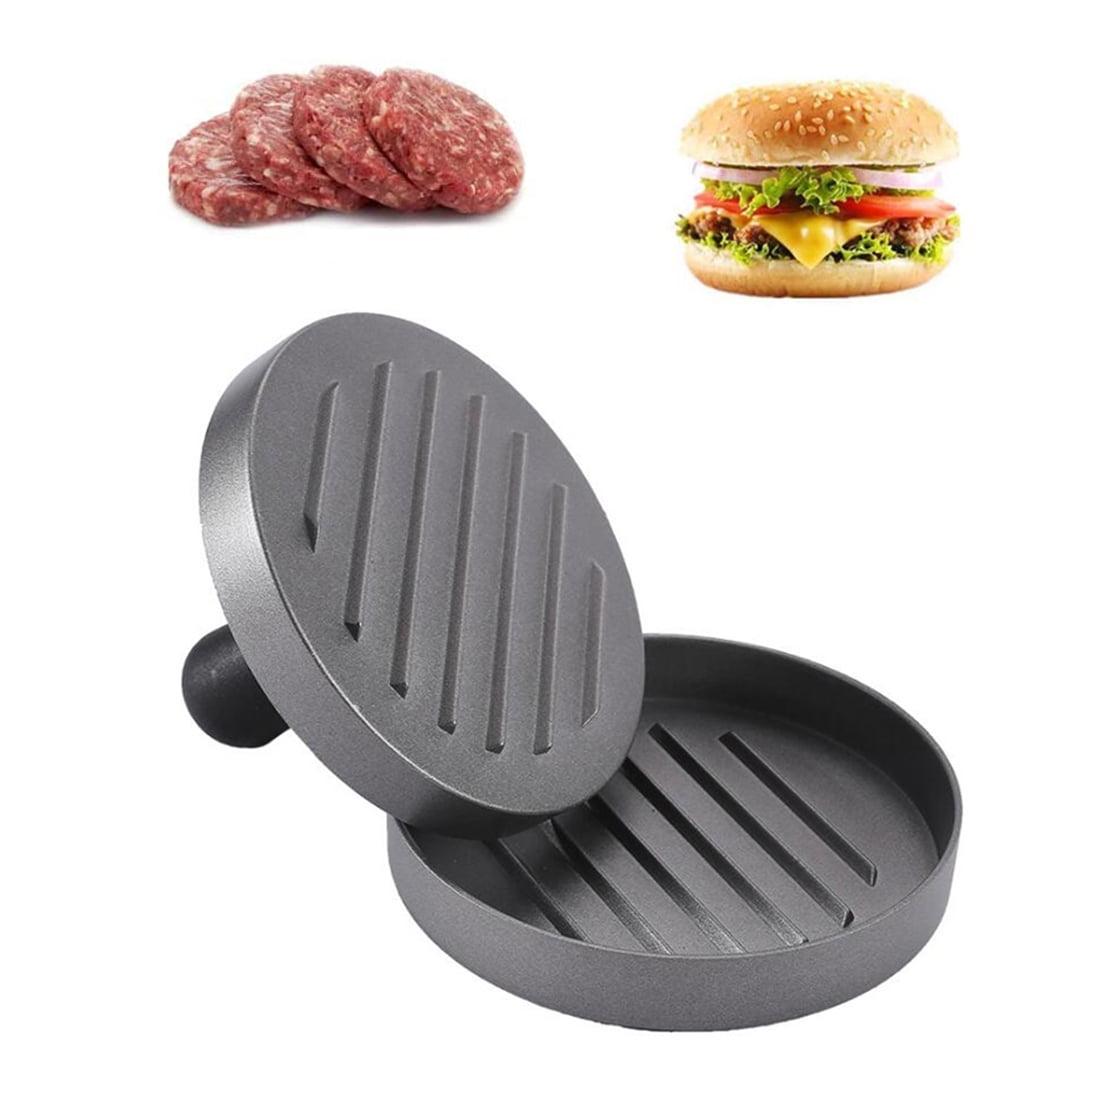 New Alloy burger patty making tools steak Maker for BBQ Party Home Kitchen Tools 